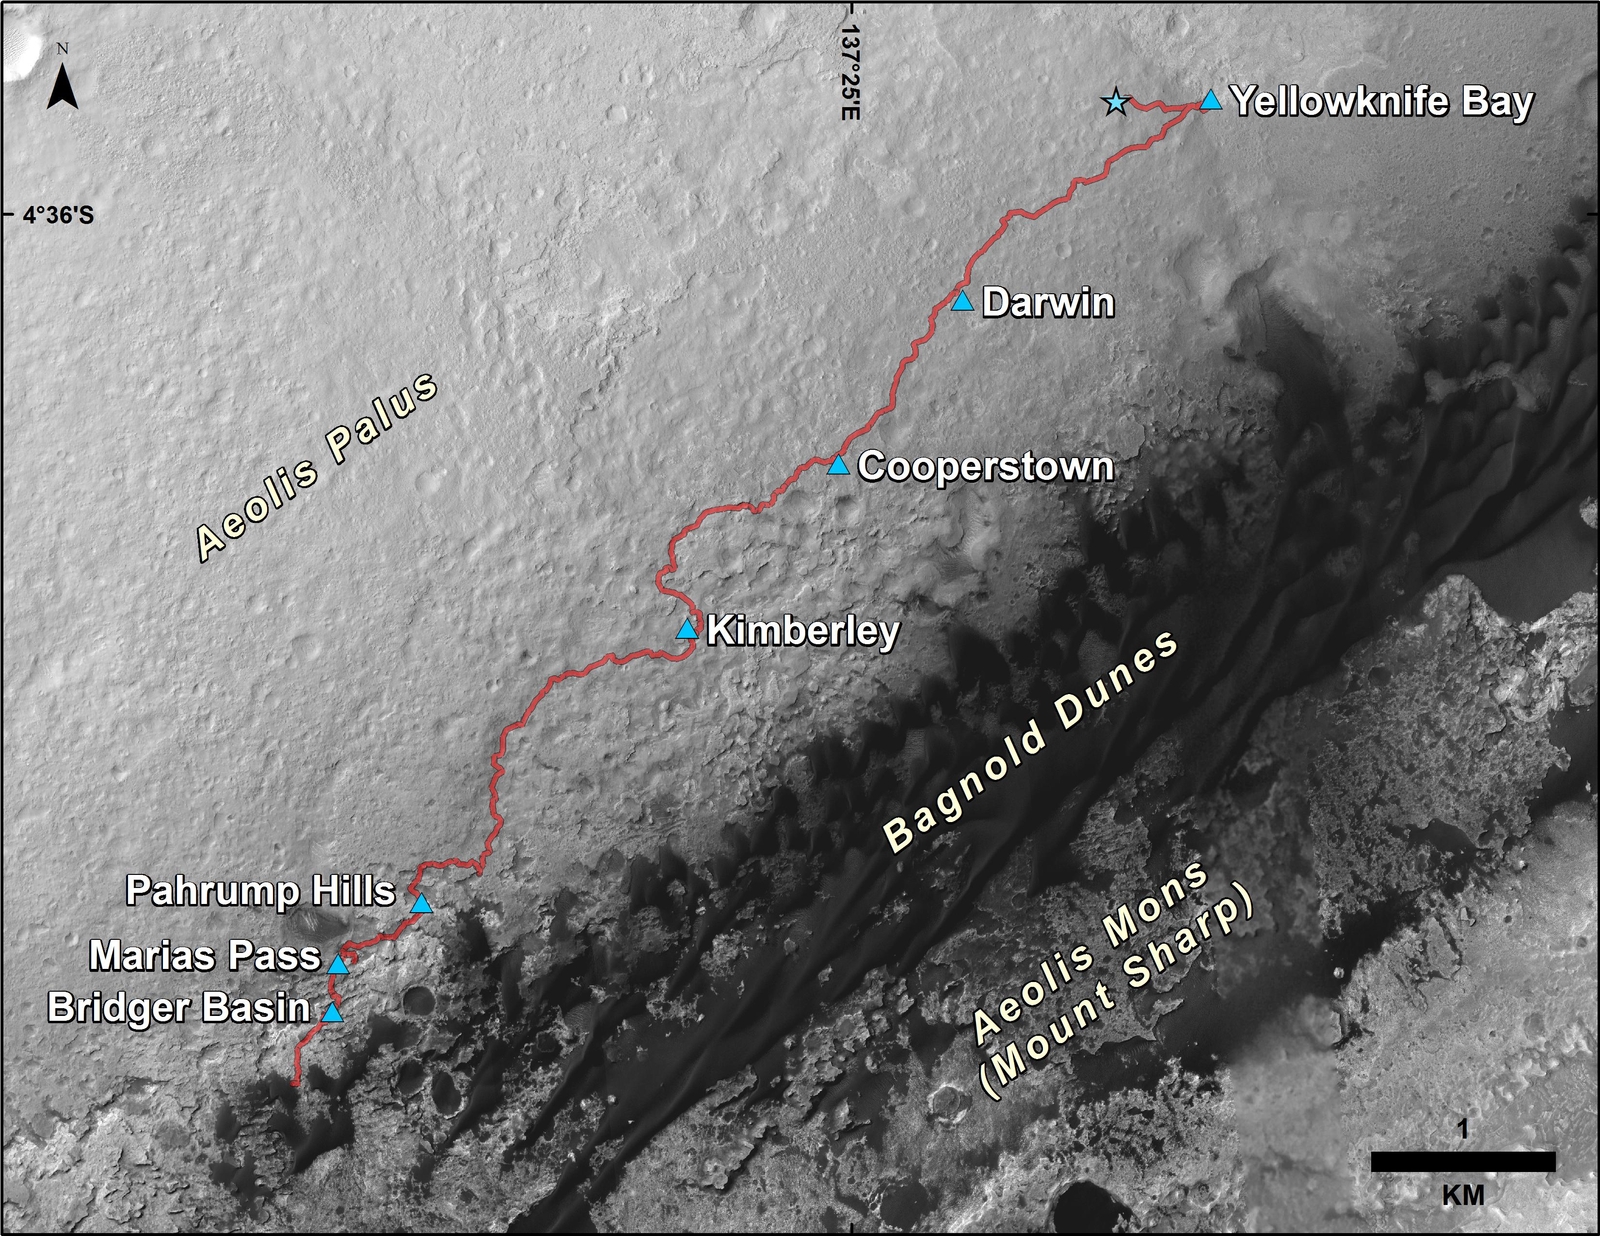 This map shows the route driven by NASA's Curiosity Mars rover from the location where it landed in August 2012 to its location in December 2015, at examples of the Bagnold Dunes.